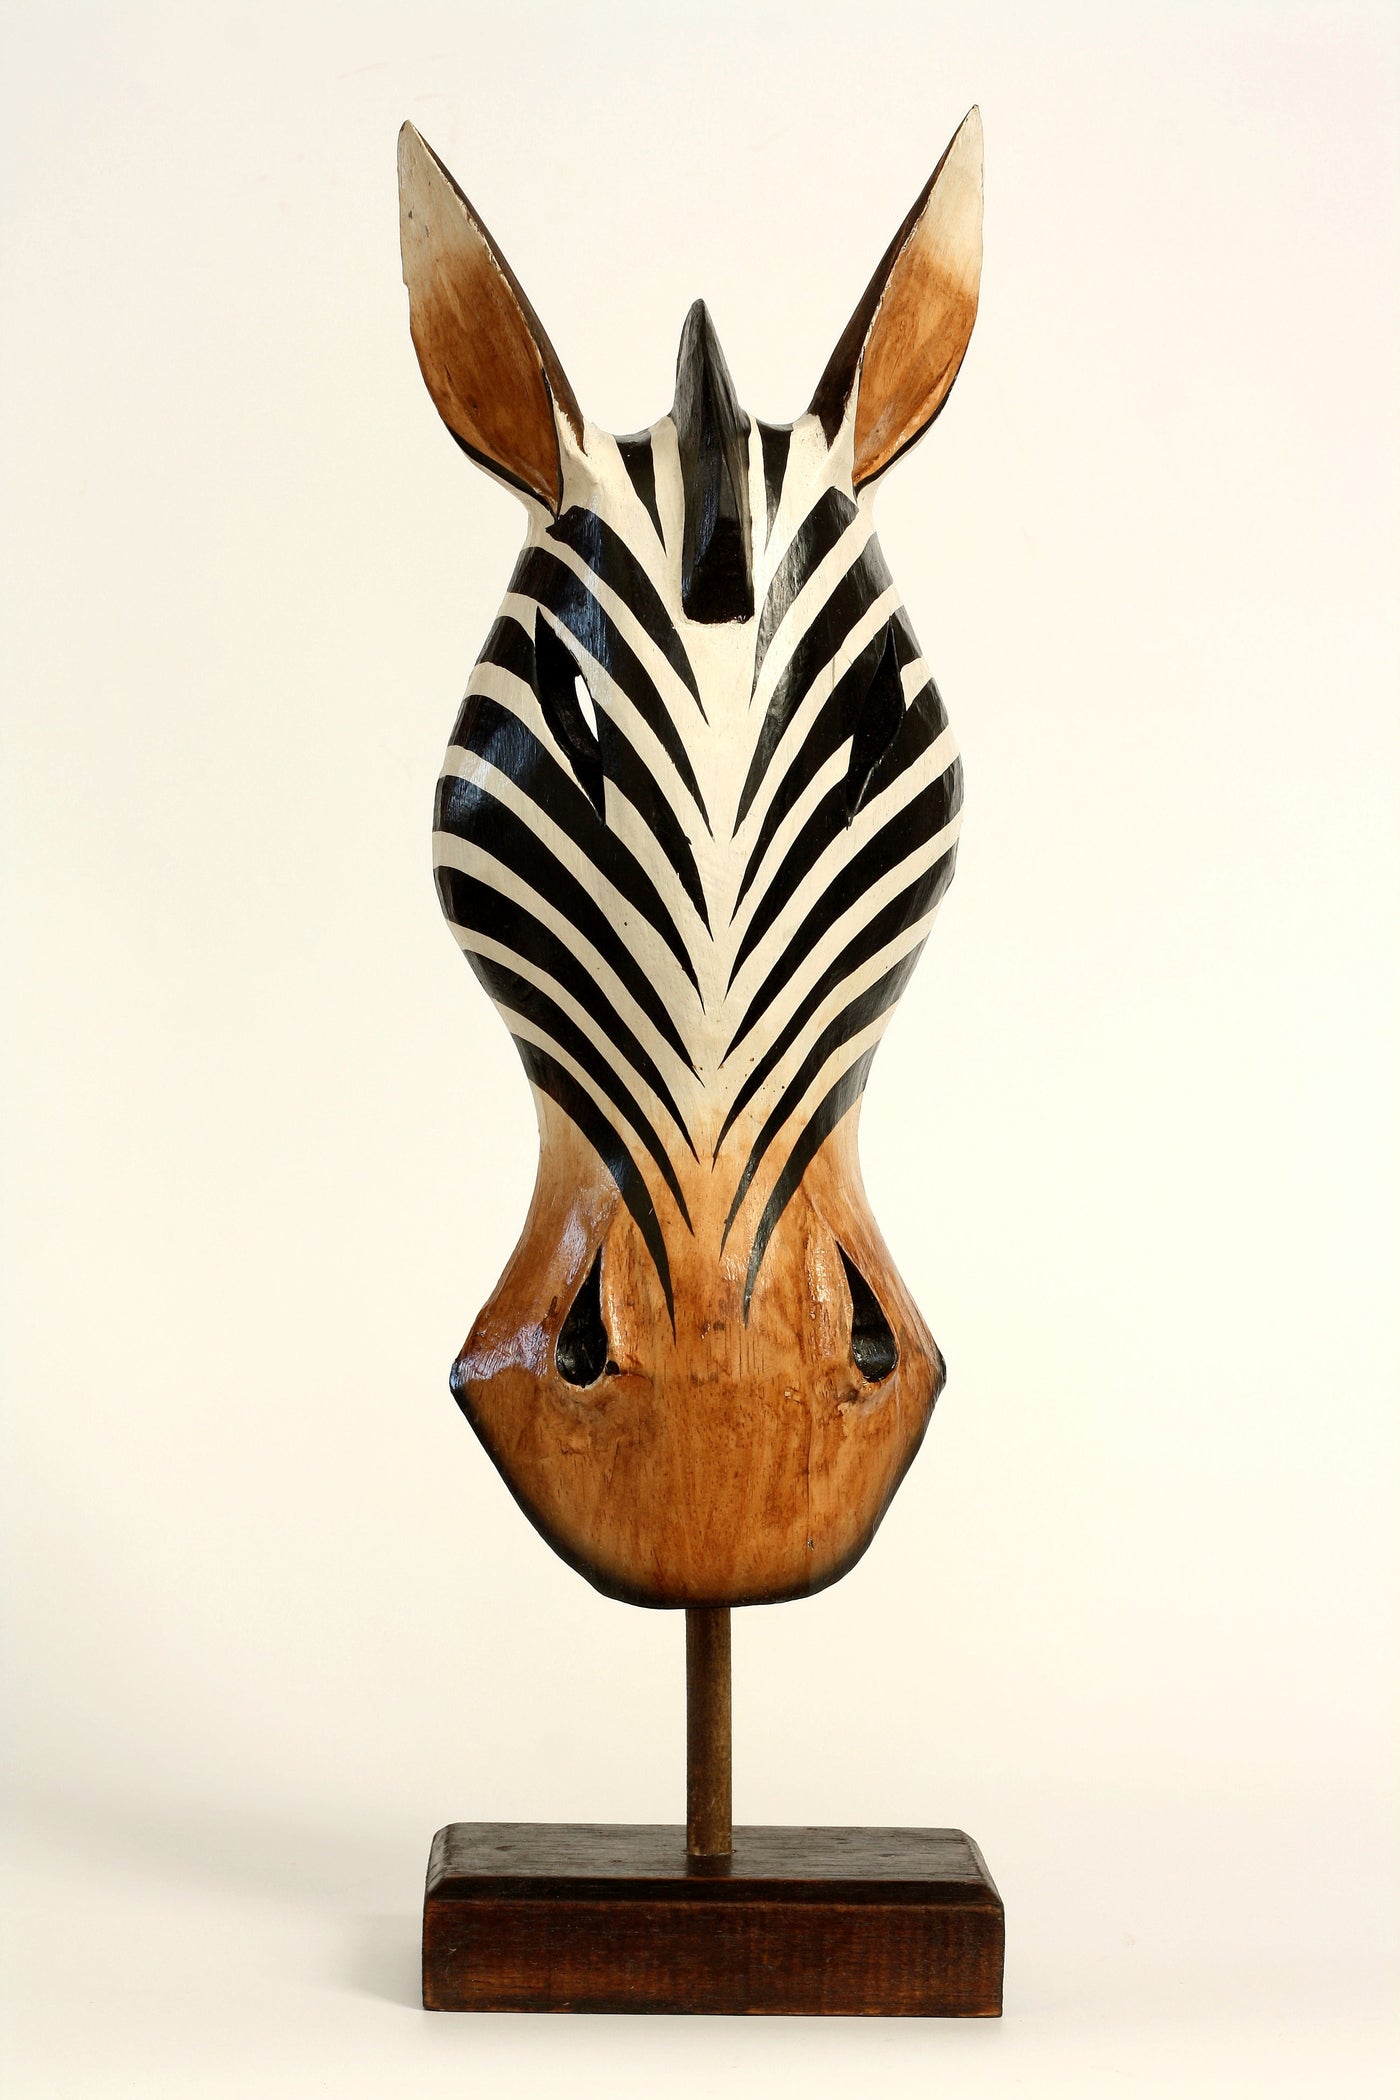 20" Wooden Tribal Striped Zebra Mask with Stand Hand Carved Home Decor Accent Art Unique Sculpture Decoration Handmade Handcrafted Mask Stand Alone